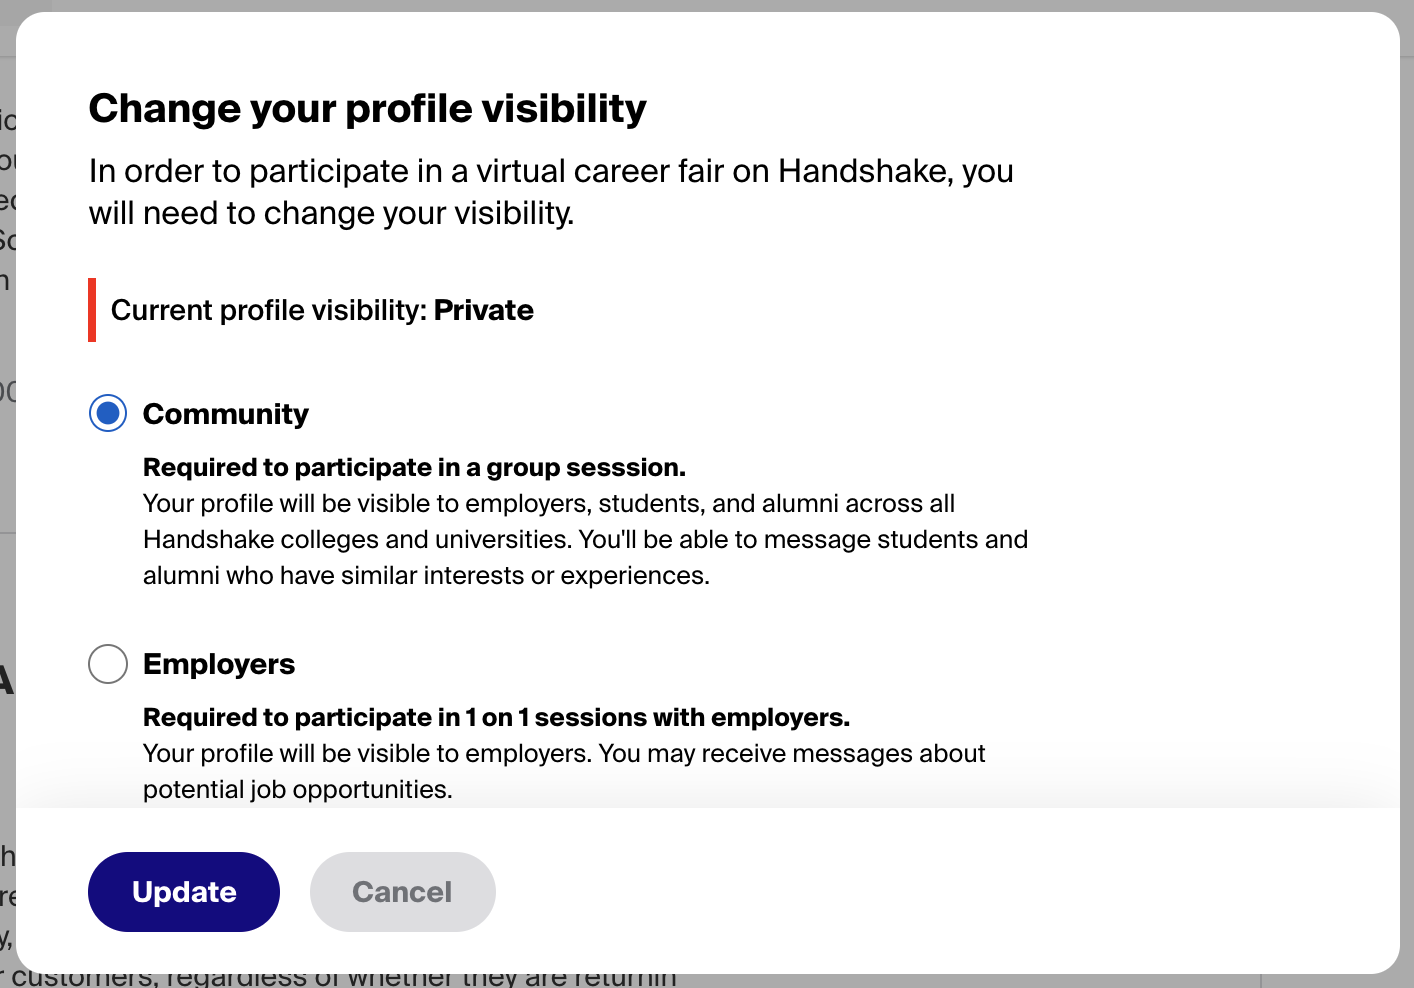 change_profile_visibility_to_participate.png